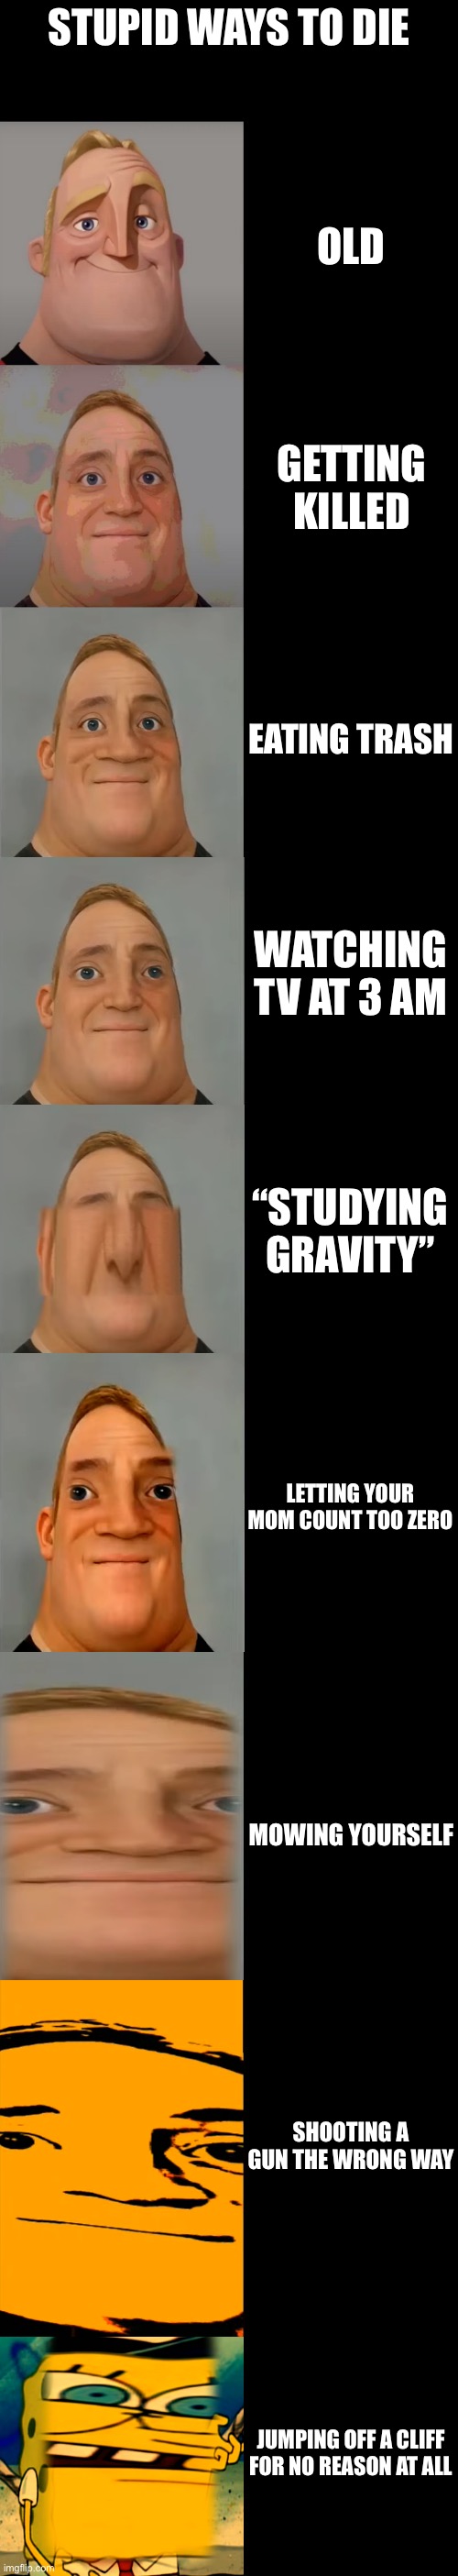 Mr incredible becoming idiot | STUPID WAYS TO DIE; OLD; GETTING KILLED; EATING TRASH; WATCHING TV AT 3 AM; “STUDYING GRAVITY”; LETTING YOUR MOM COUNT TOO ZERO; MOWING YOURSELF; SHOOTING A GUN THE WRONG WAY; JUMPING OFF A CLIFF FOR NO REASON AT ALL | image tagged in mr incredible becoming idiot template | made w/ Imgflip meme maker